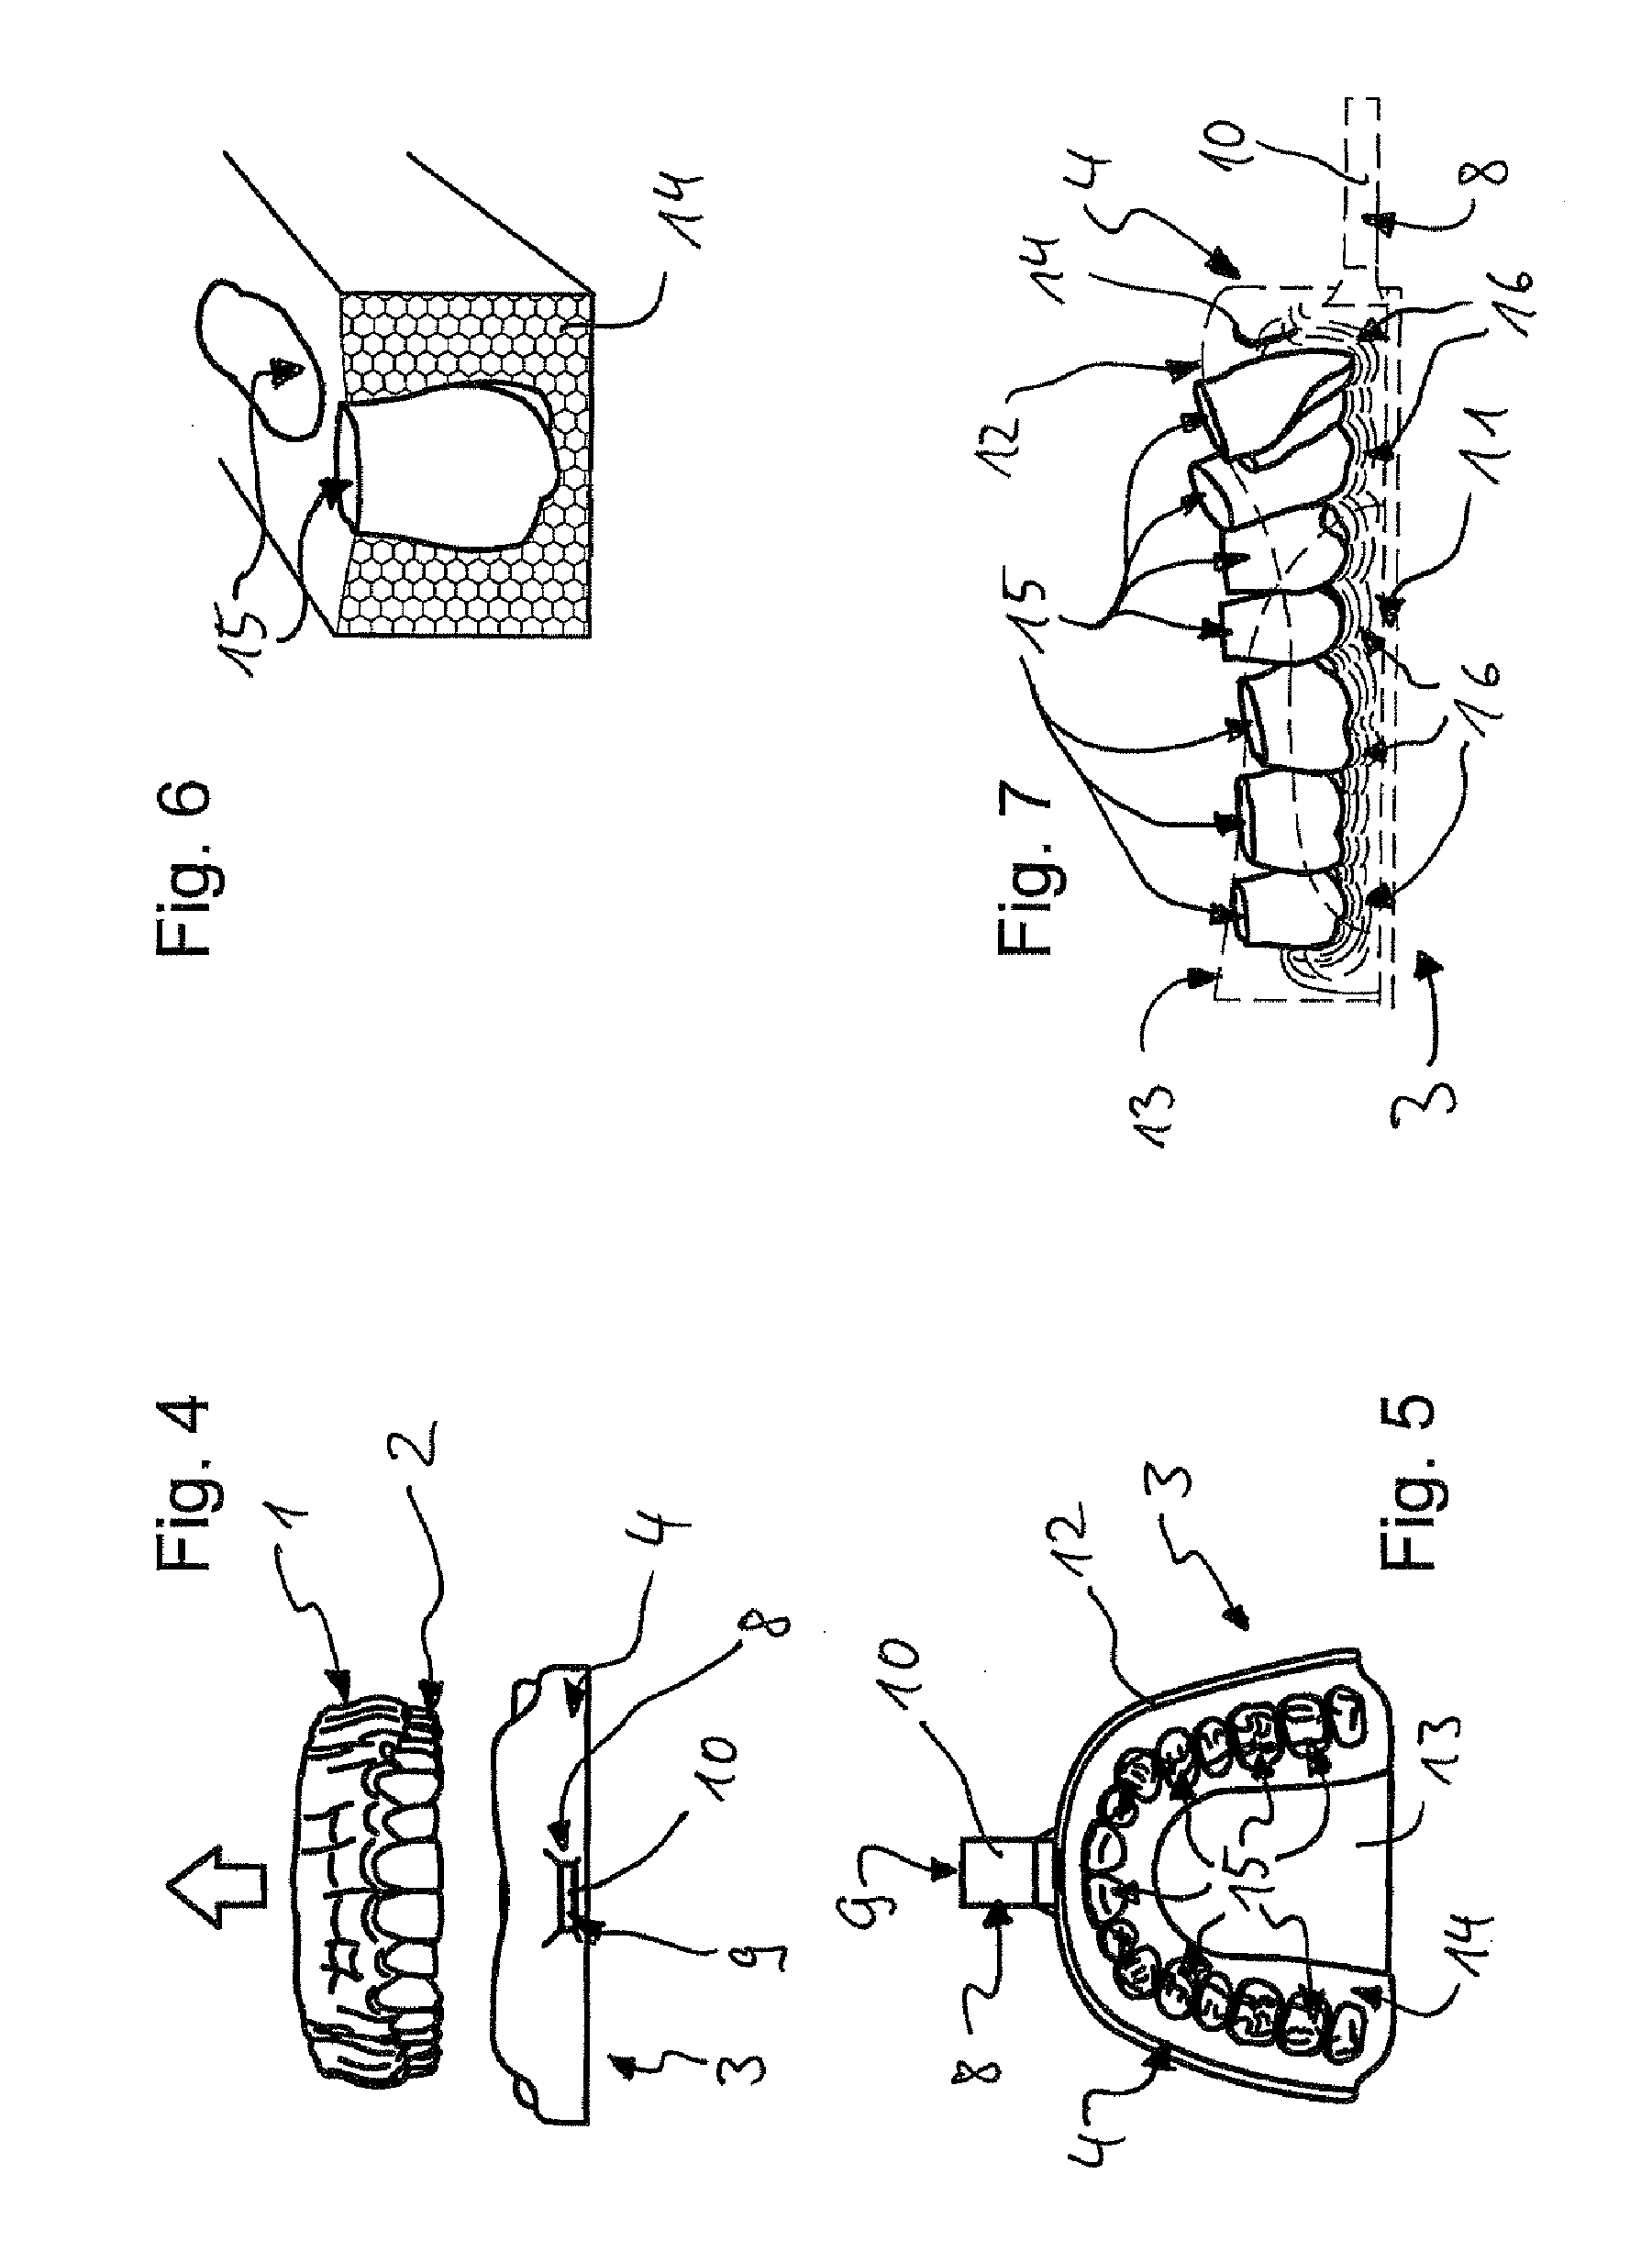 Impression tray, and method for capturing structures, arrangements or shapes, in particular in the mouth or human body